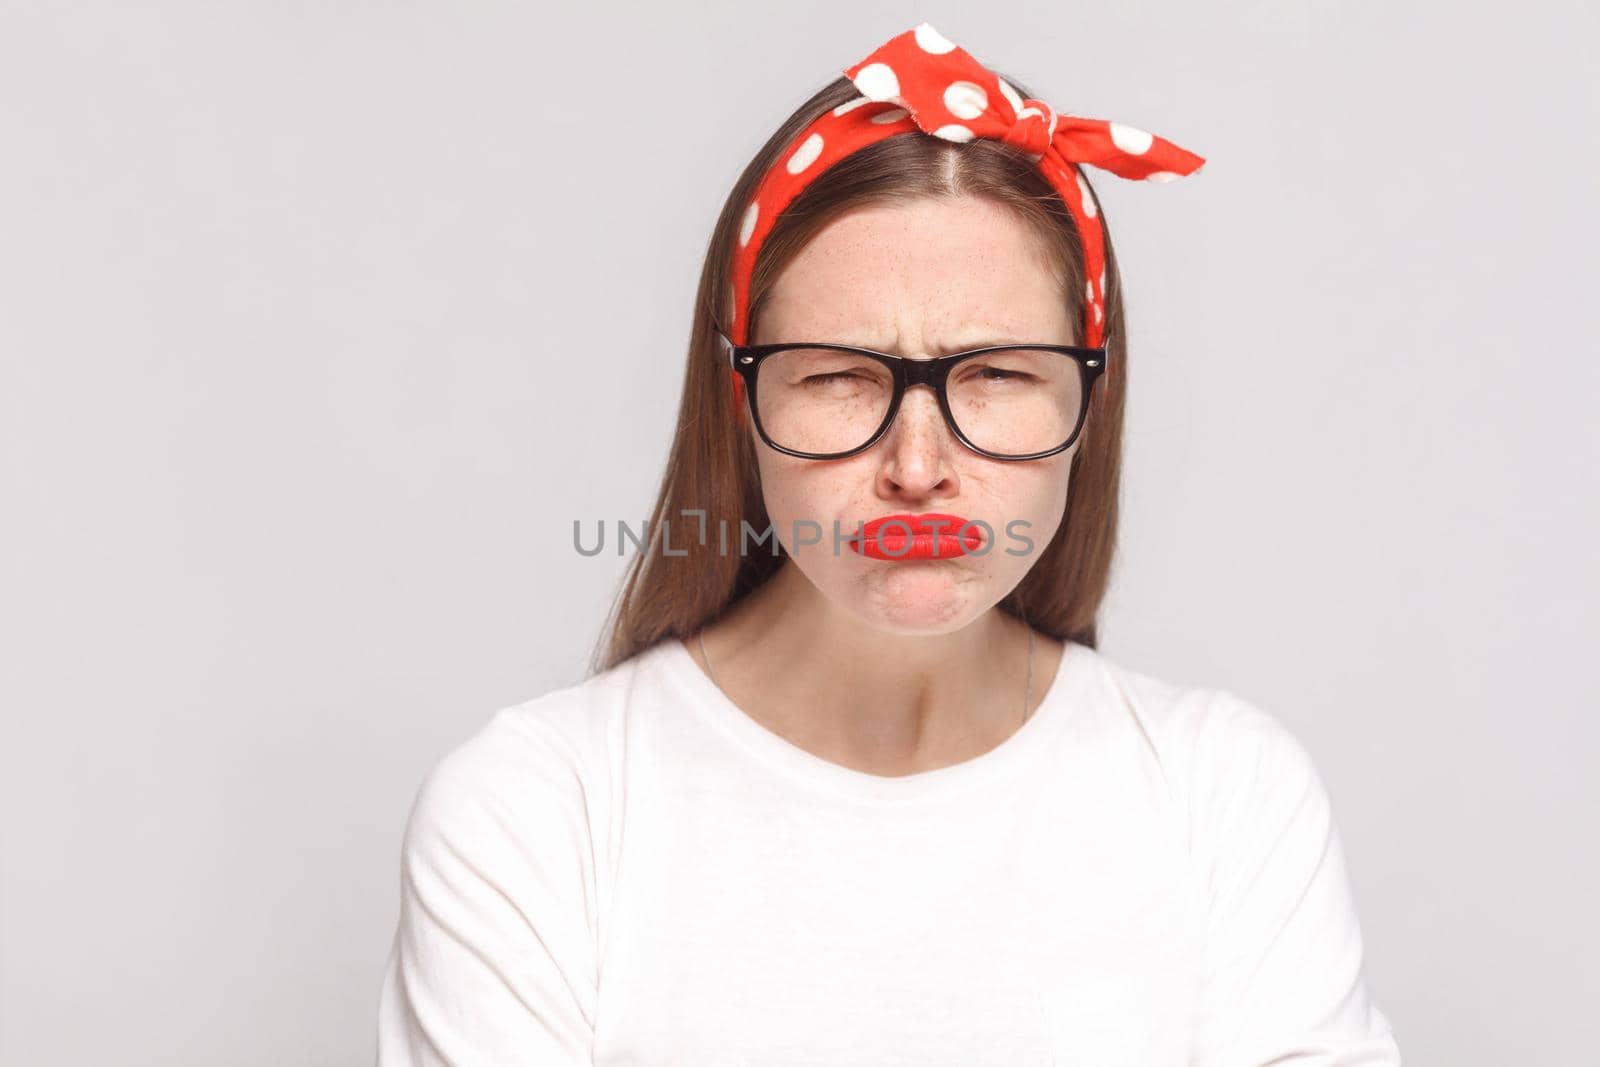 sad unhappy portrait of beautiful emotional young woman looking at camera in white t-shirt with freckles, black glasses, red lips and head band. indoor studio shot, isolated on light gray background.